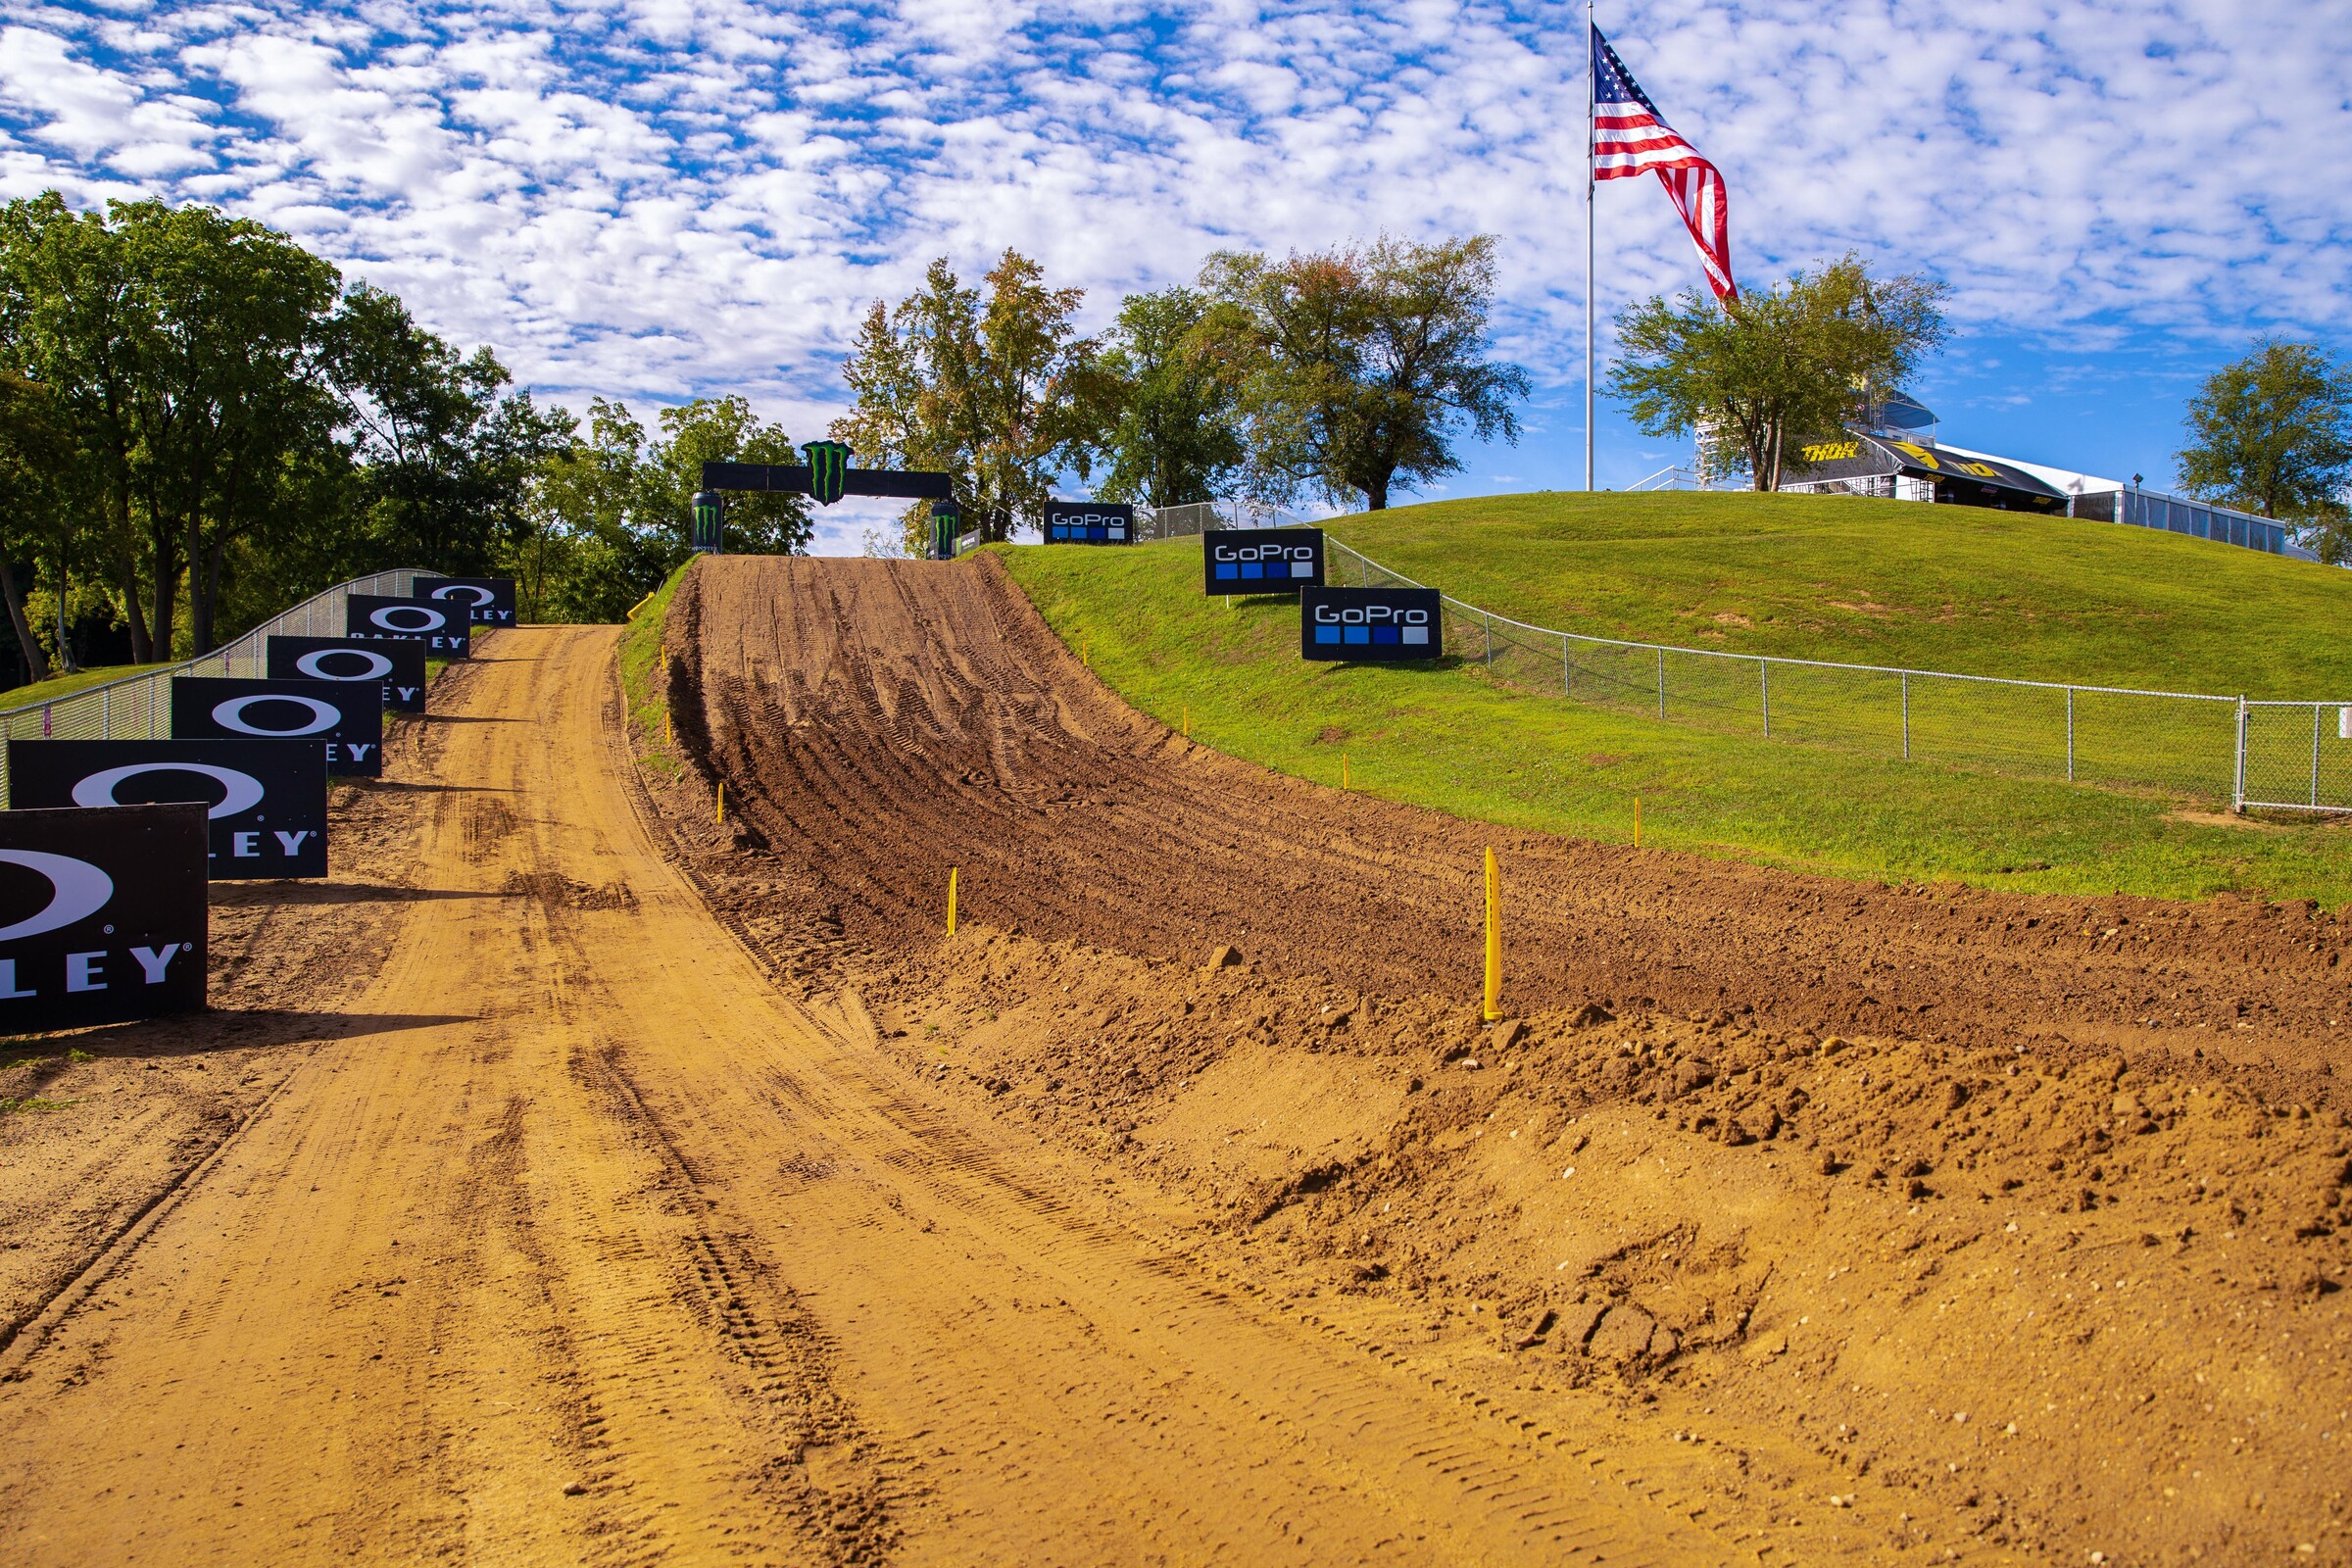 2022 Motocross of Nations Saturday Live Updates